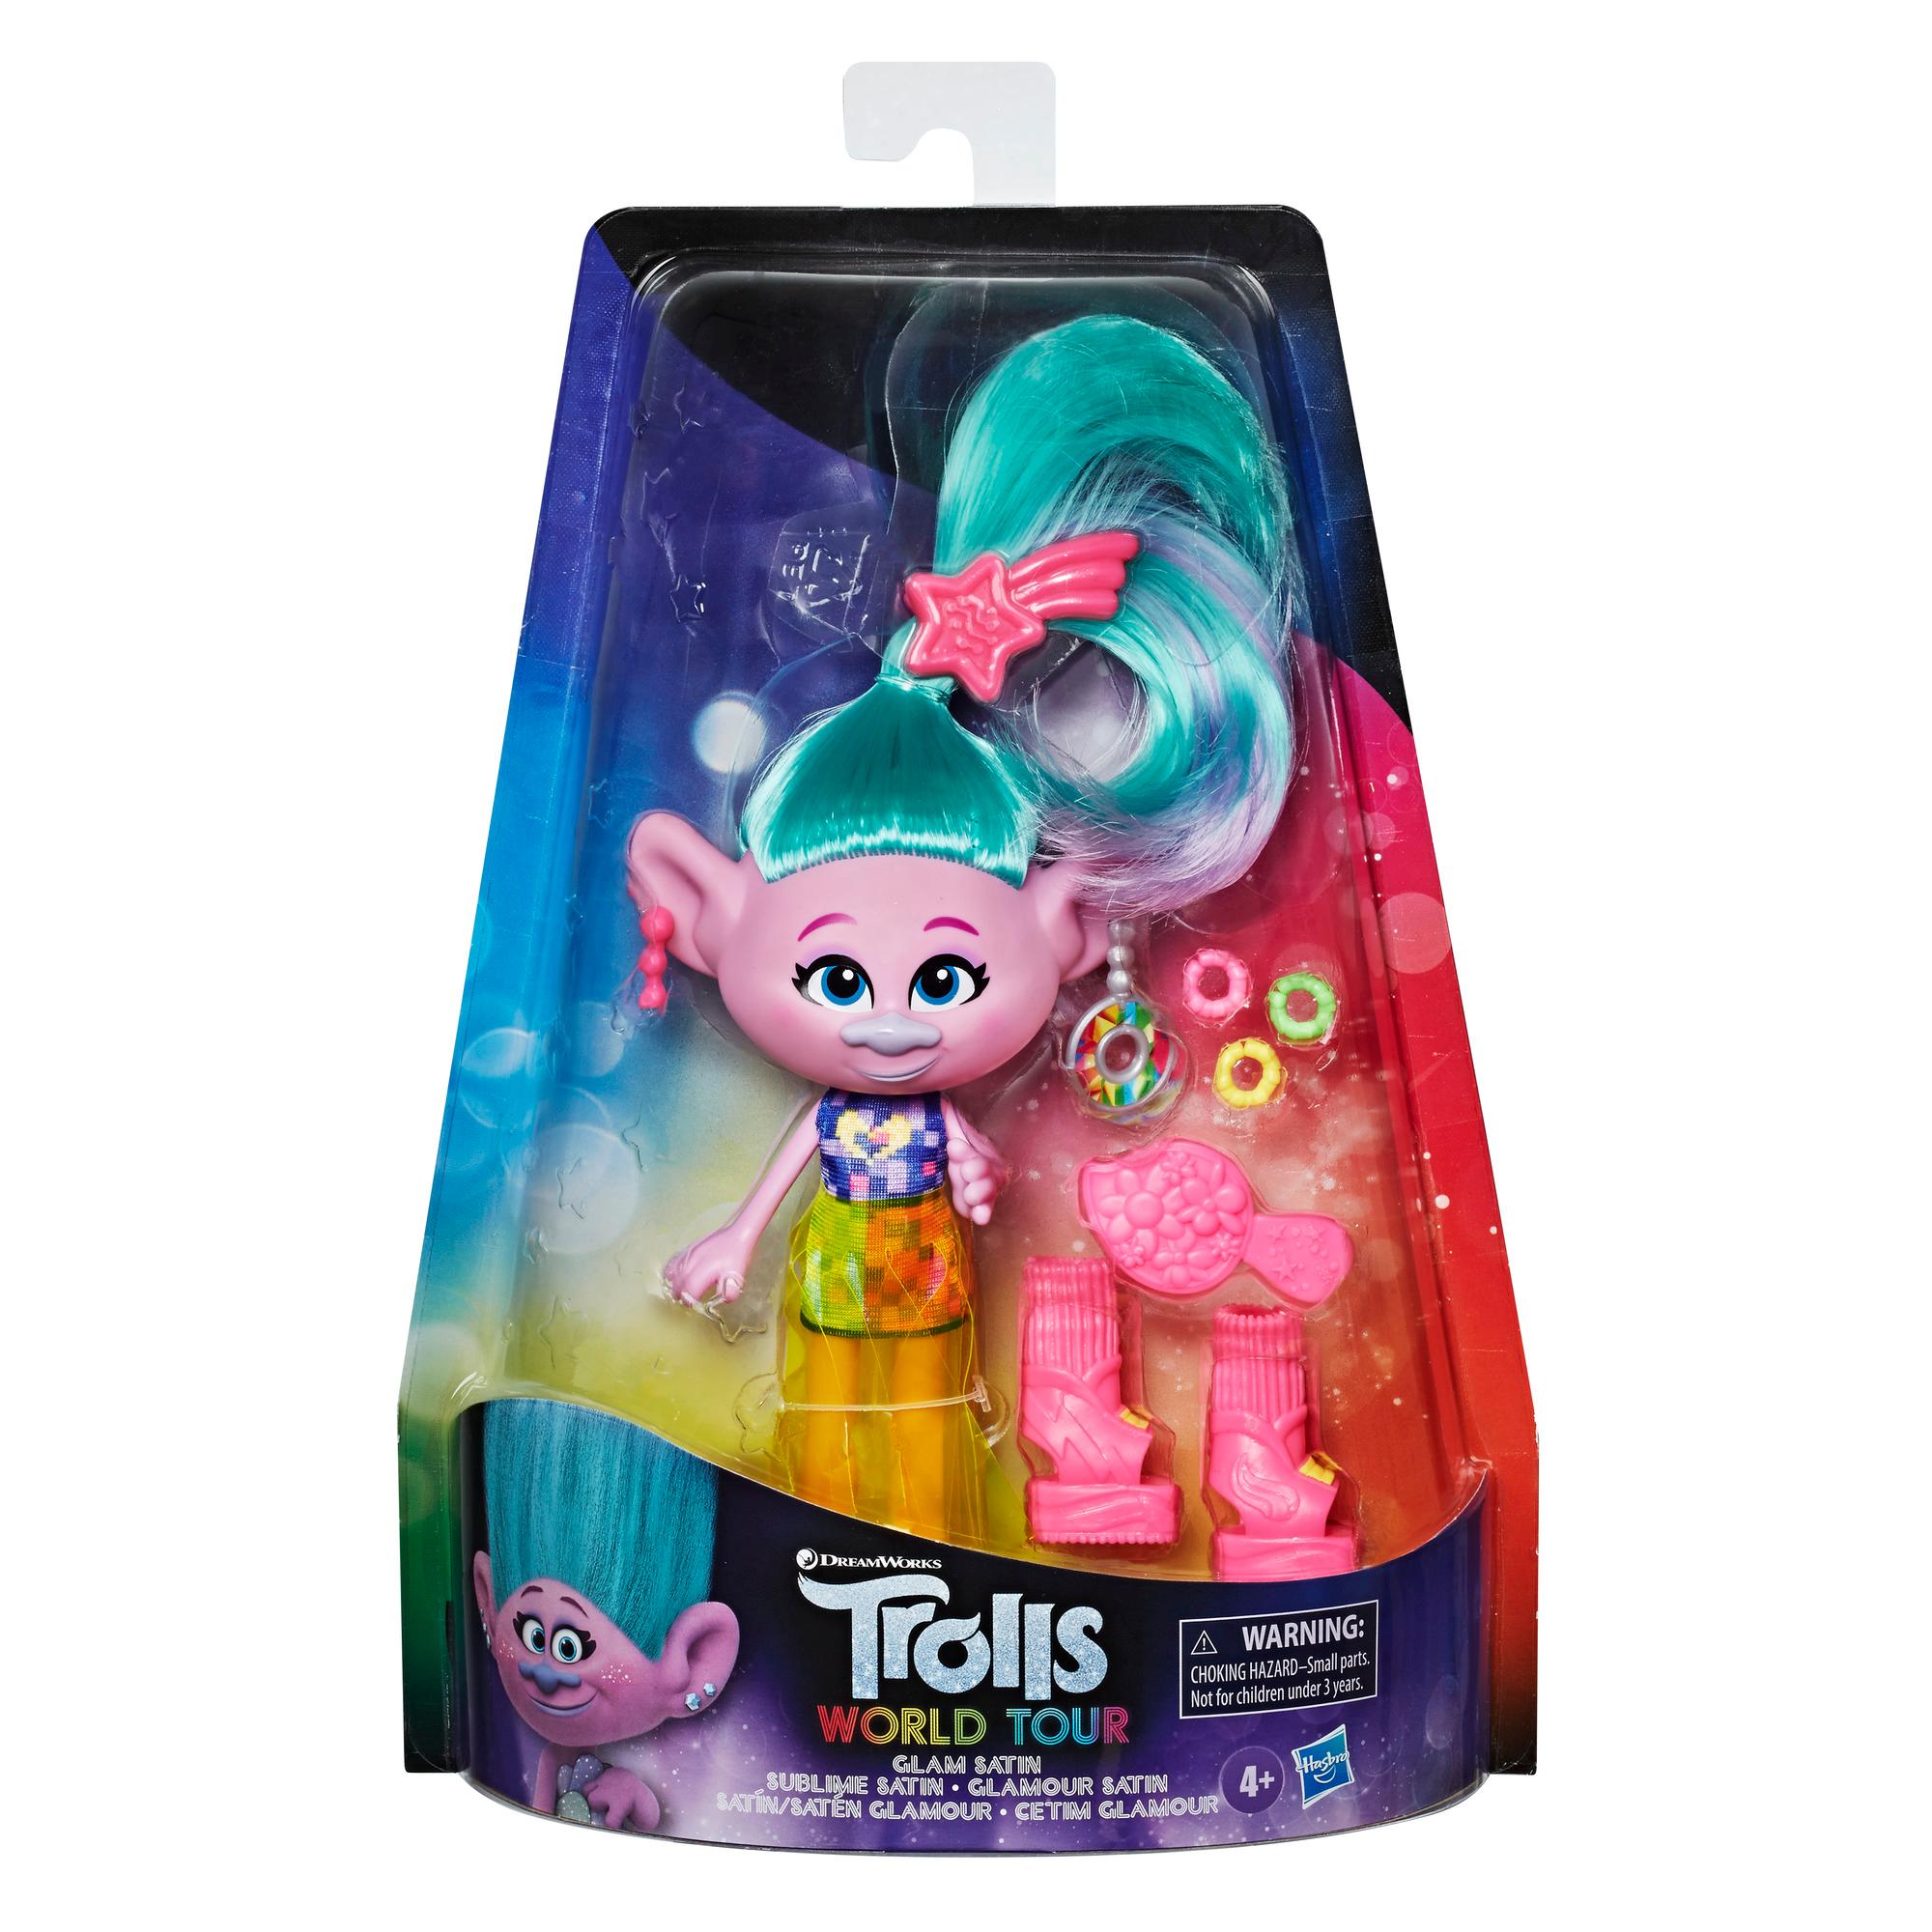 DreamWorks Trolls Glam Satin Fashion Doll with Dress, and More, Inspired by the Movie Trolls World Tour, Toy for Girls